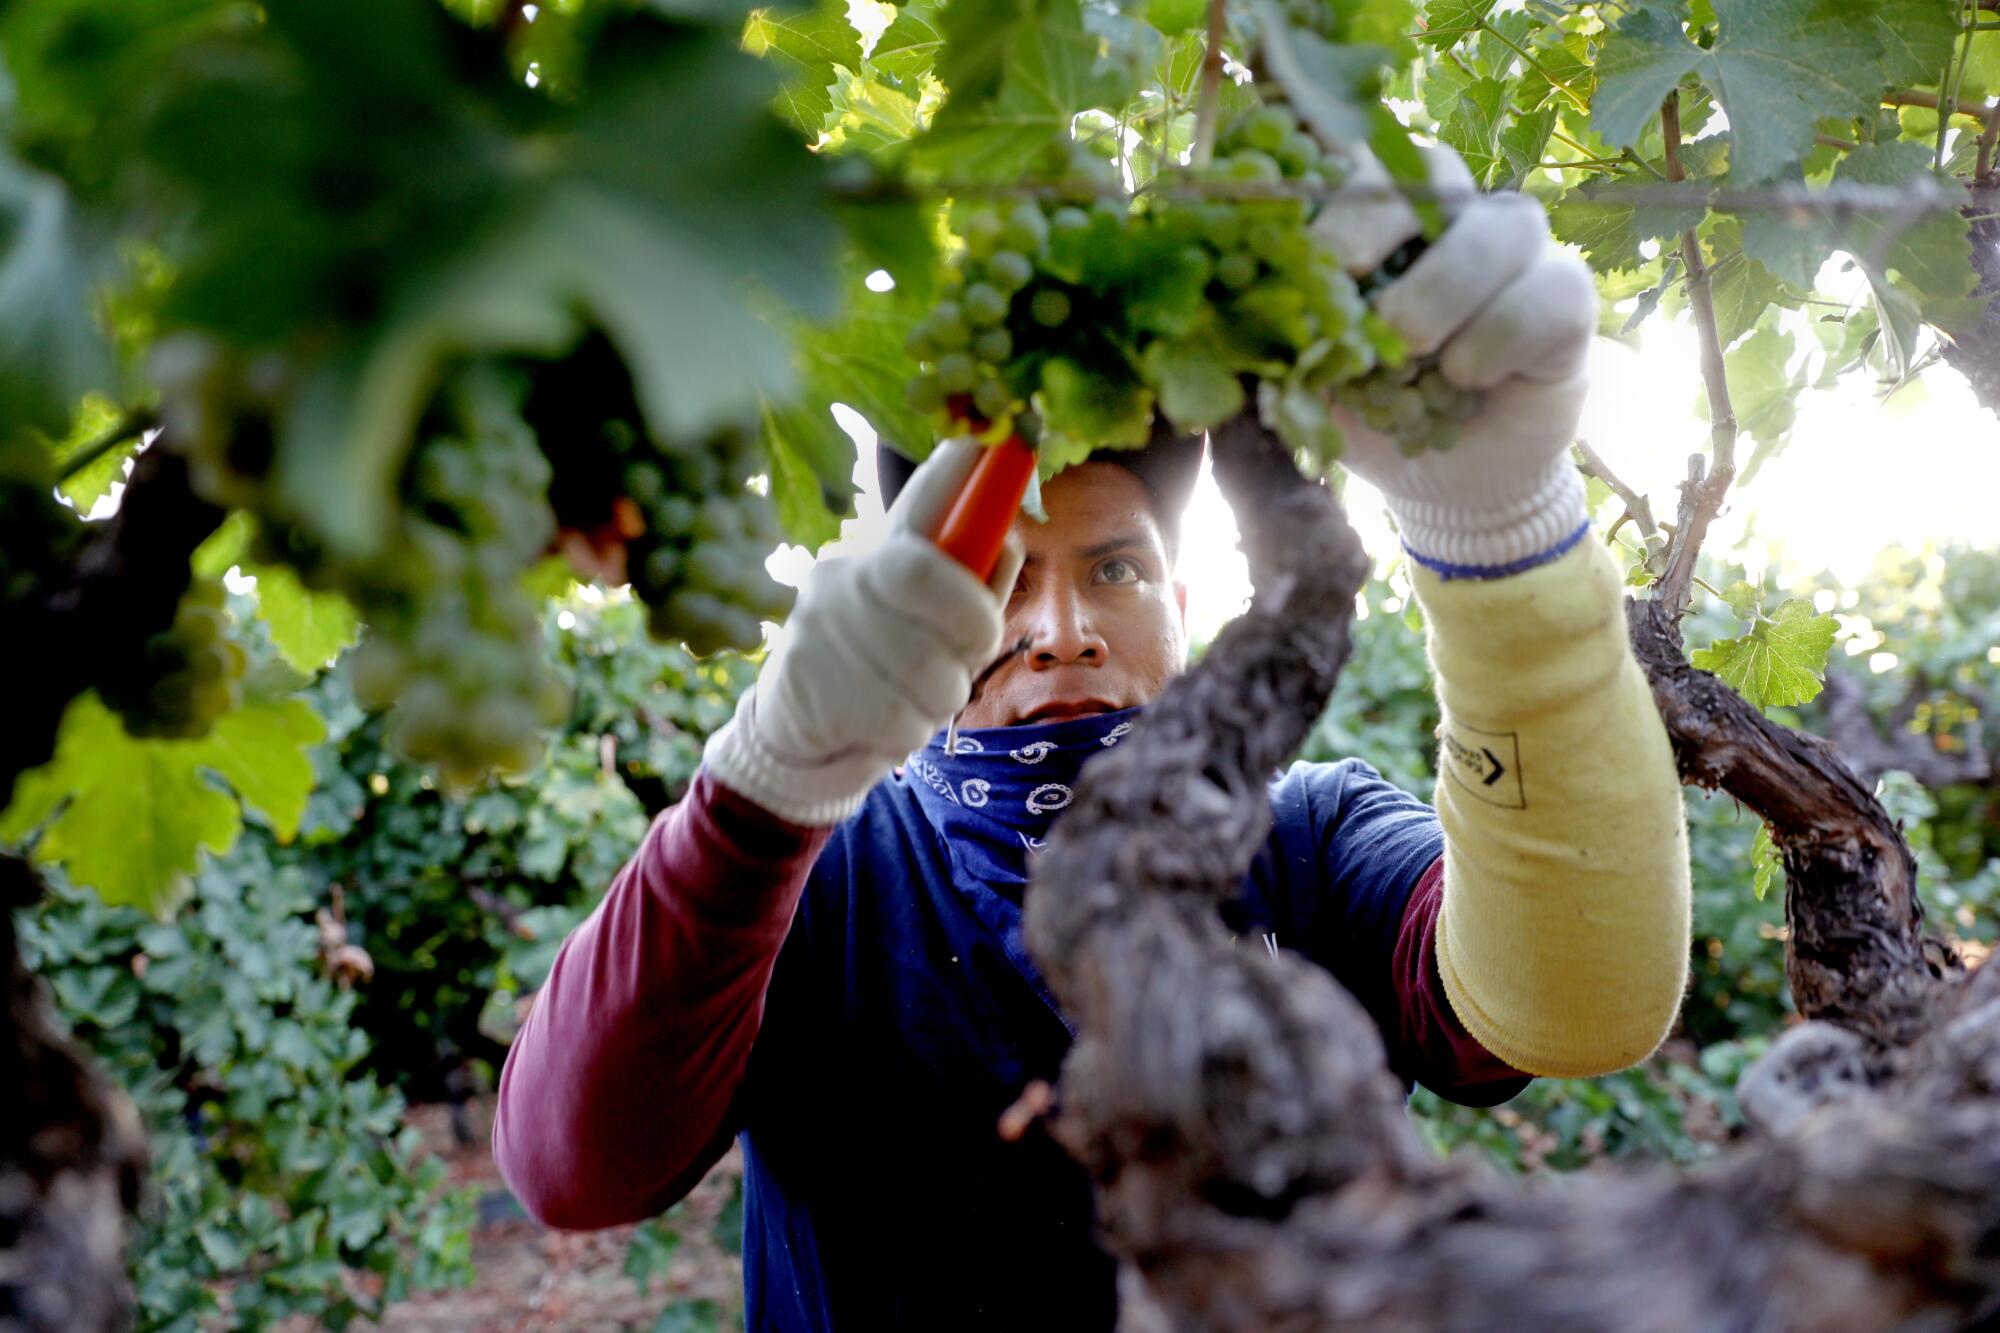 Farmworkers pick white wine grapes grown for Massican Winery.